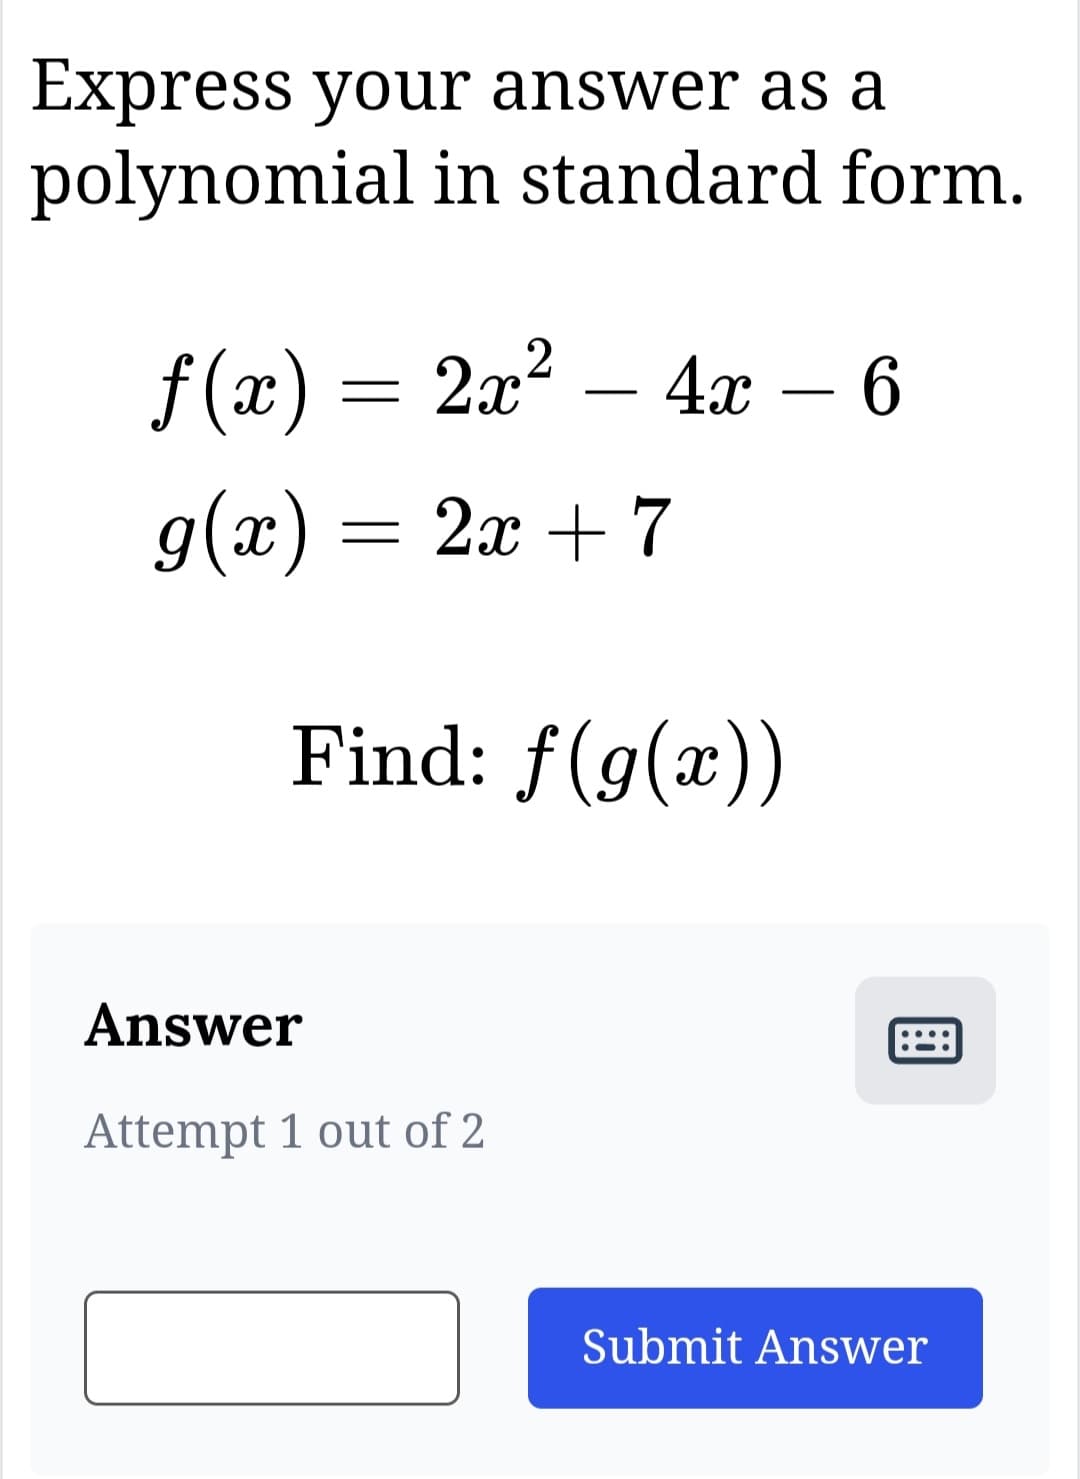 Express your answer as a
polynomial in standard form.
f(x) = 2x² - 4x - 6
g(x) = 2x + 7
Find: f(g(x))
Answer
Attempt 1 out of 2
Submit Answer